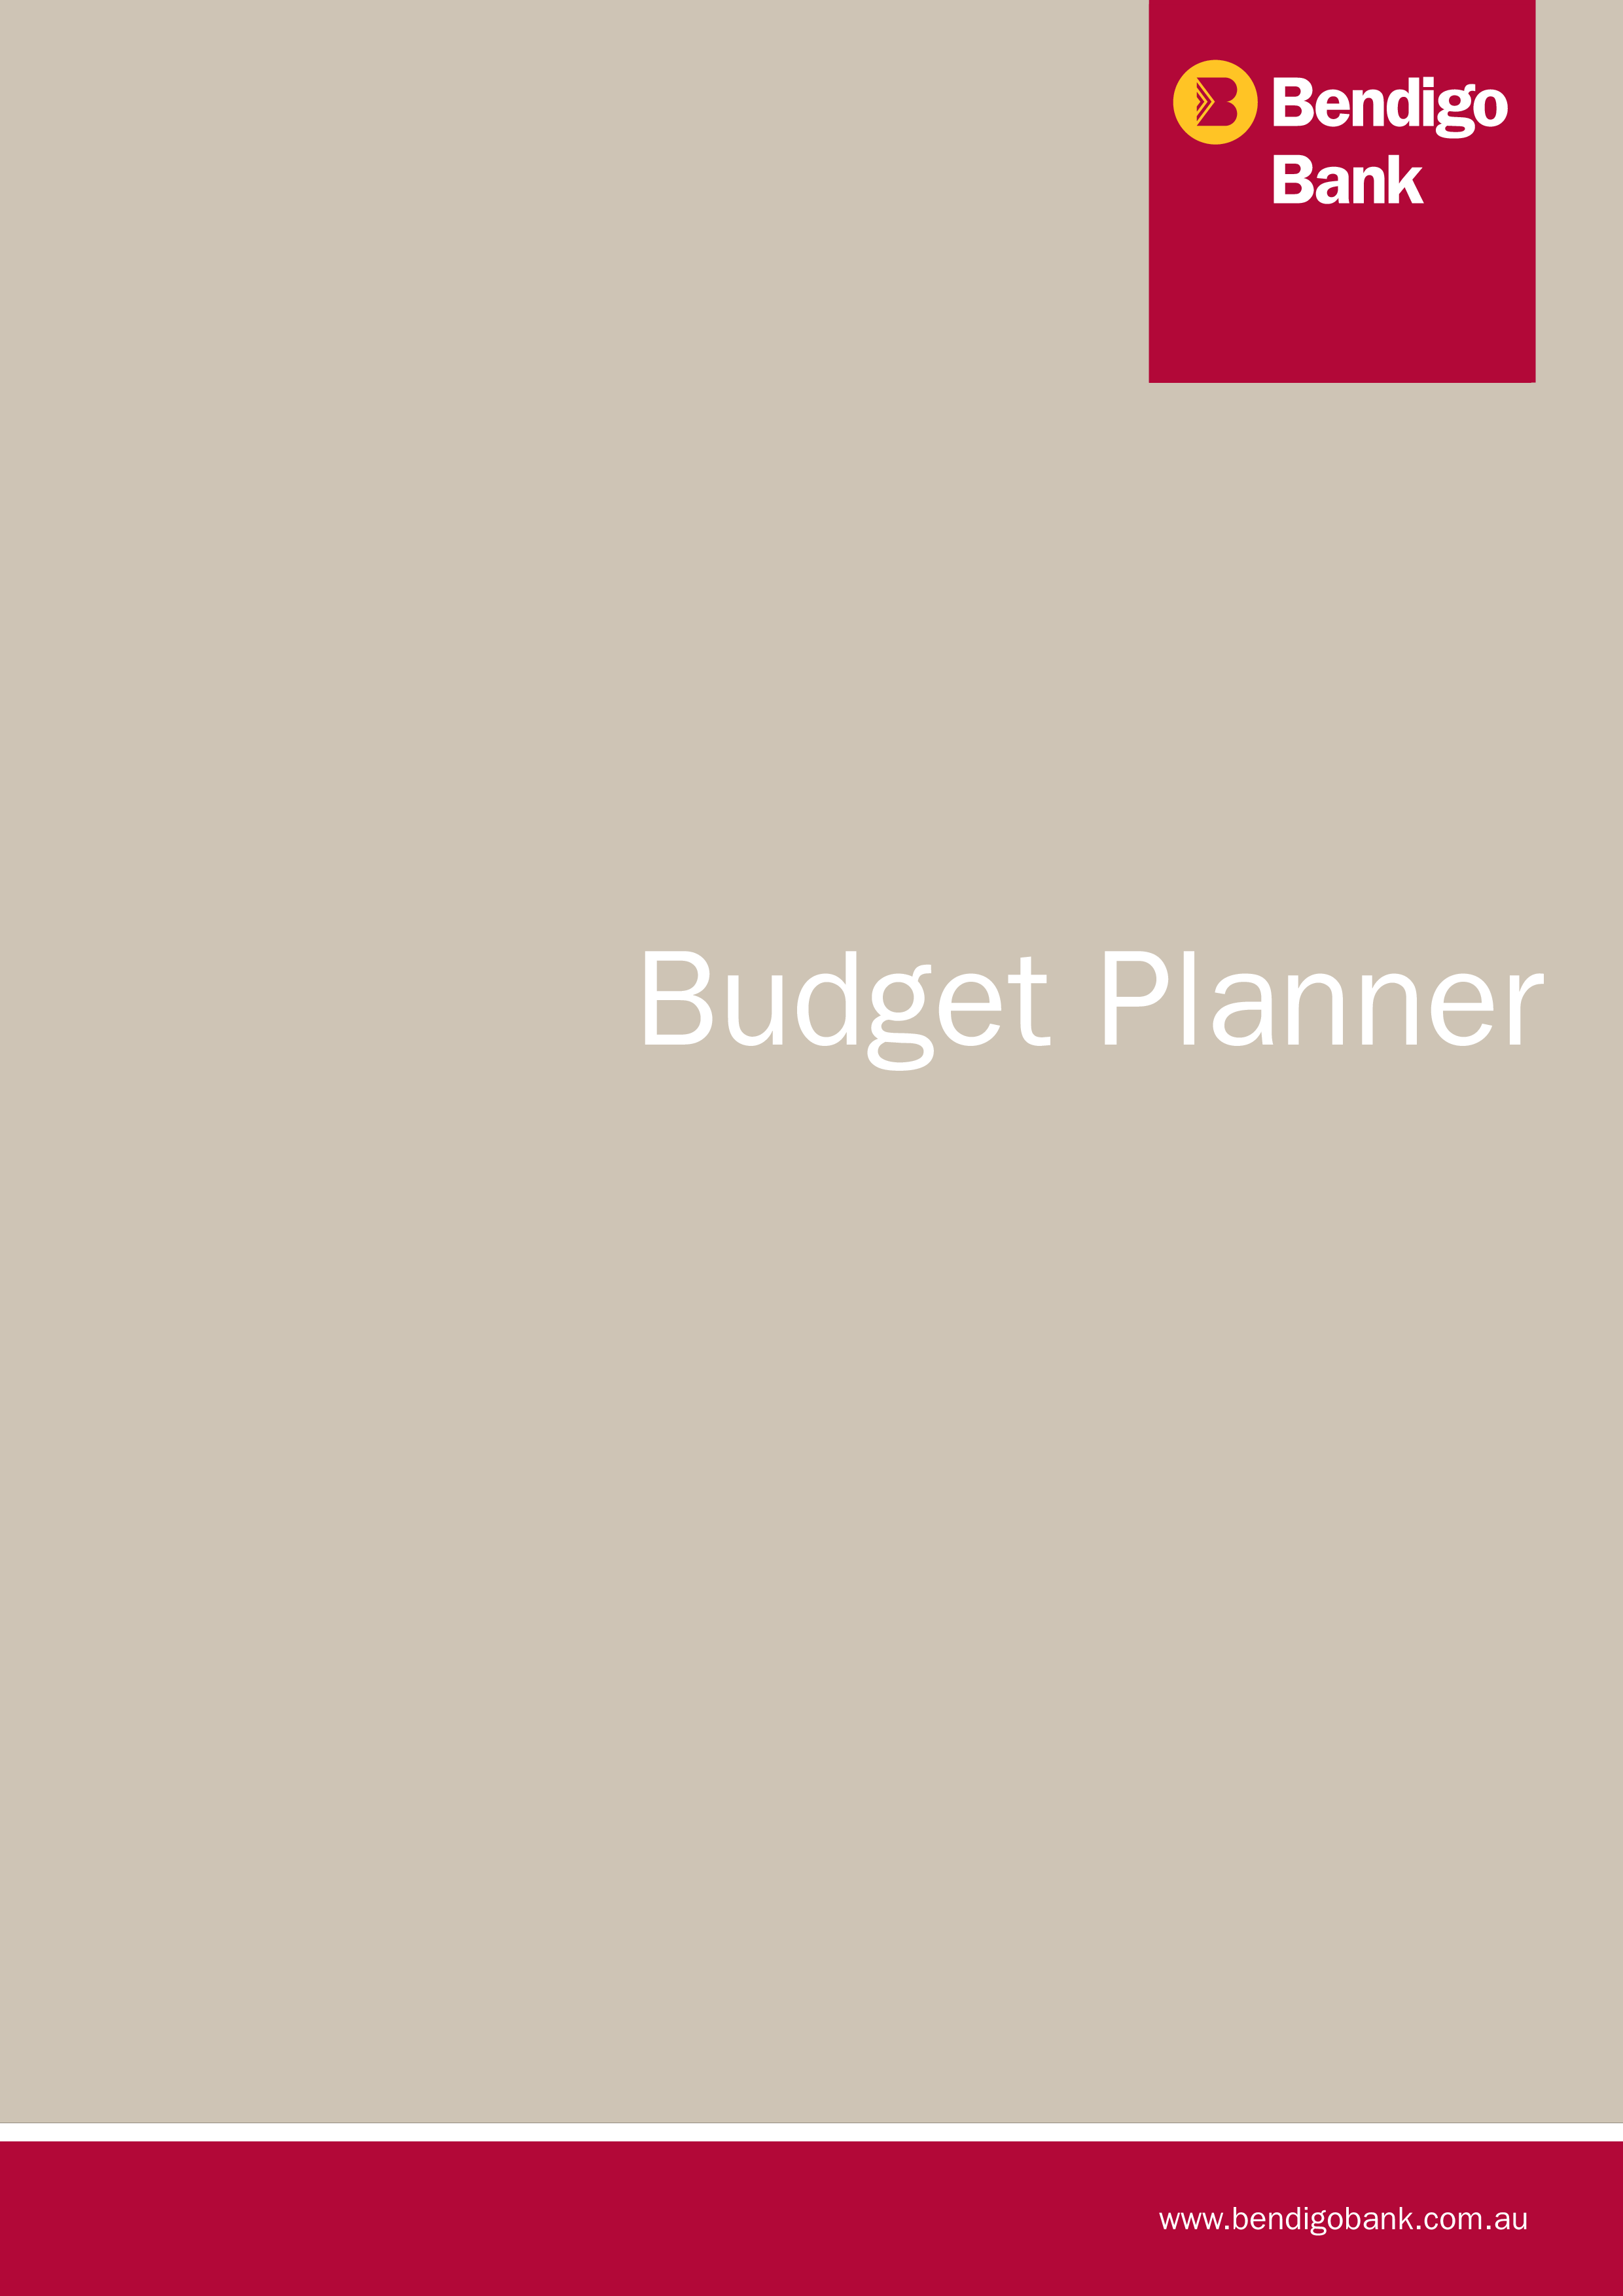 Monthly Budget Planner 模板